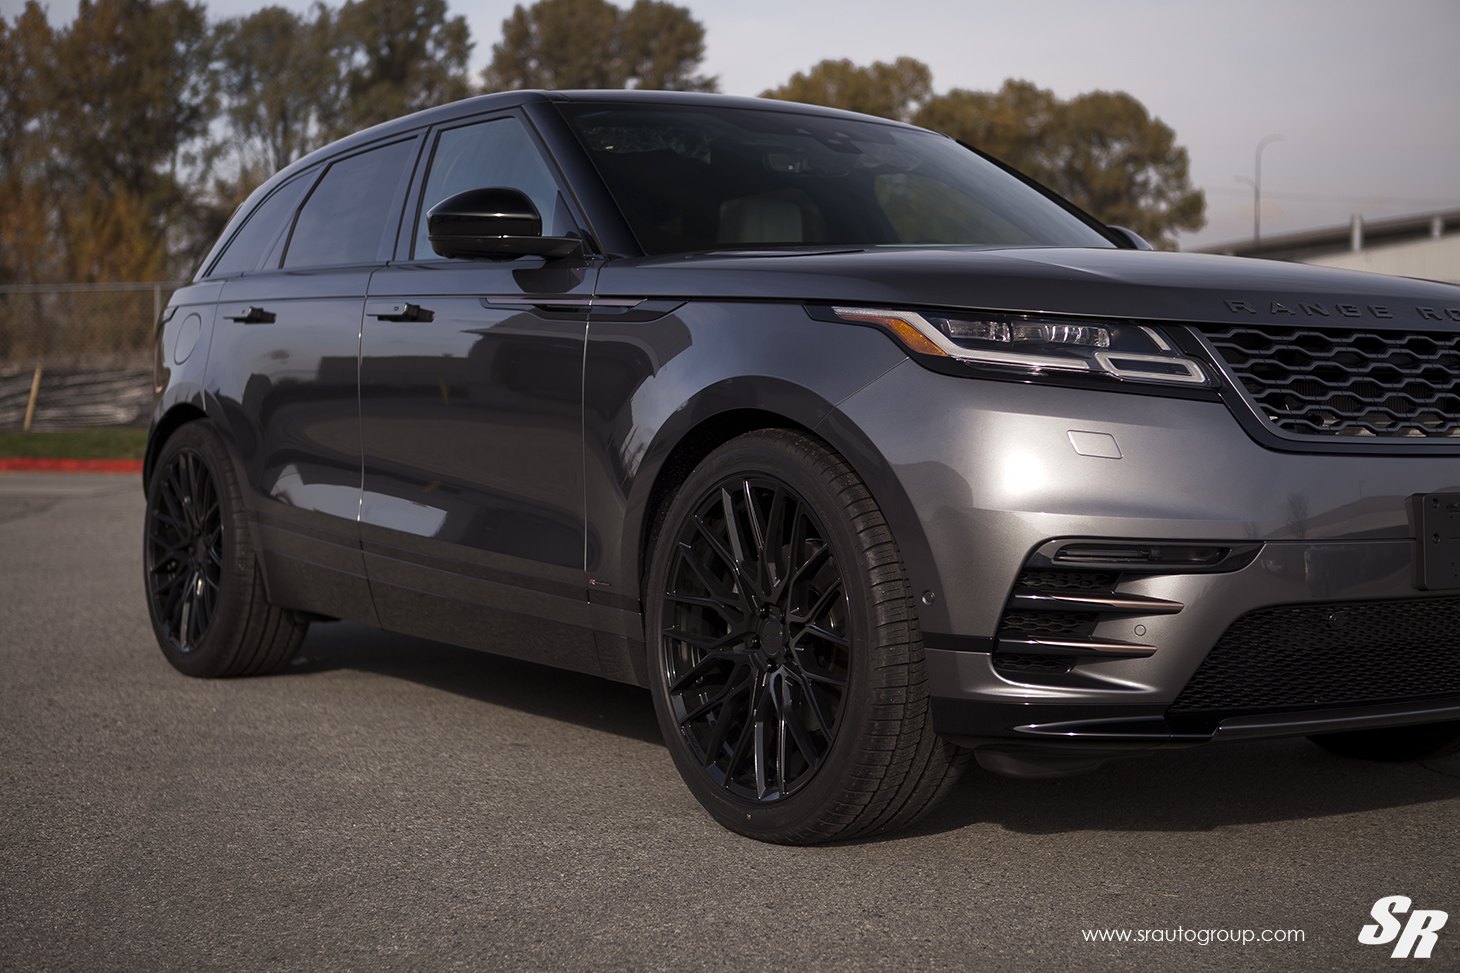 Black Range Rover Velar with Aftermarket Headlights - Photo by SR Auto Group